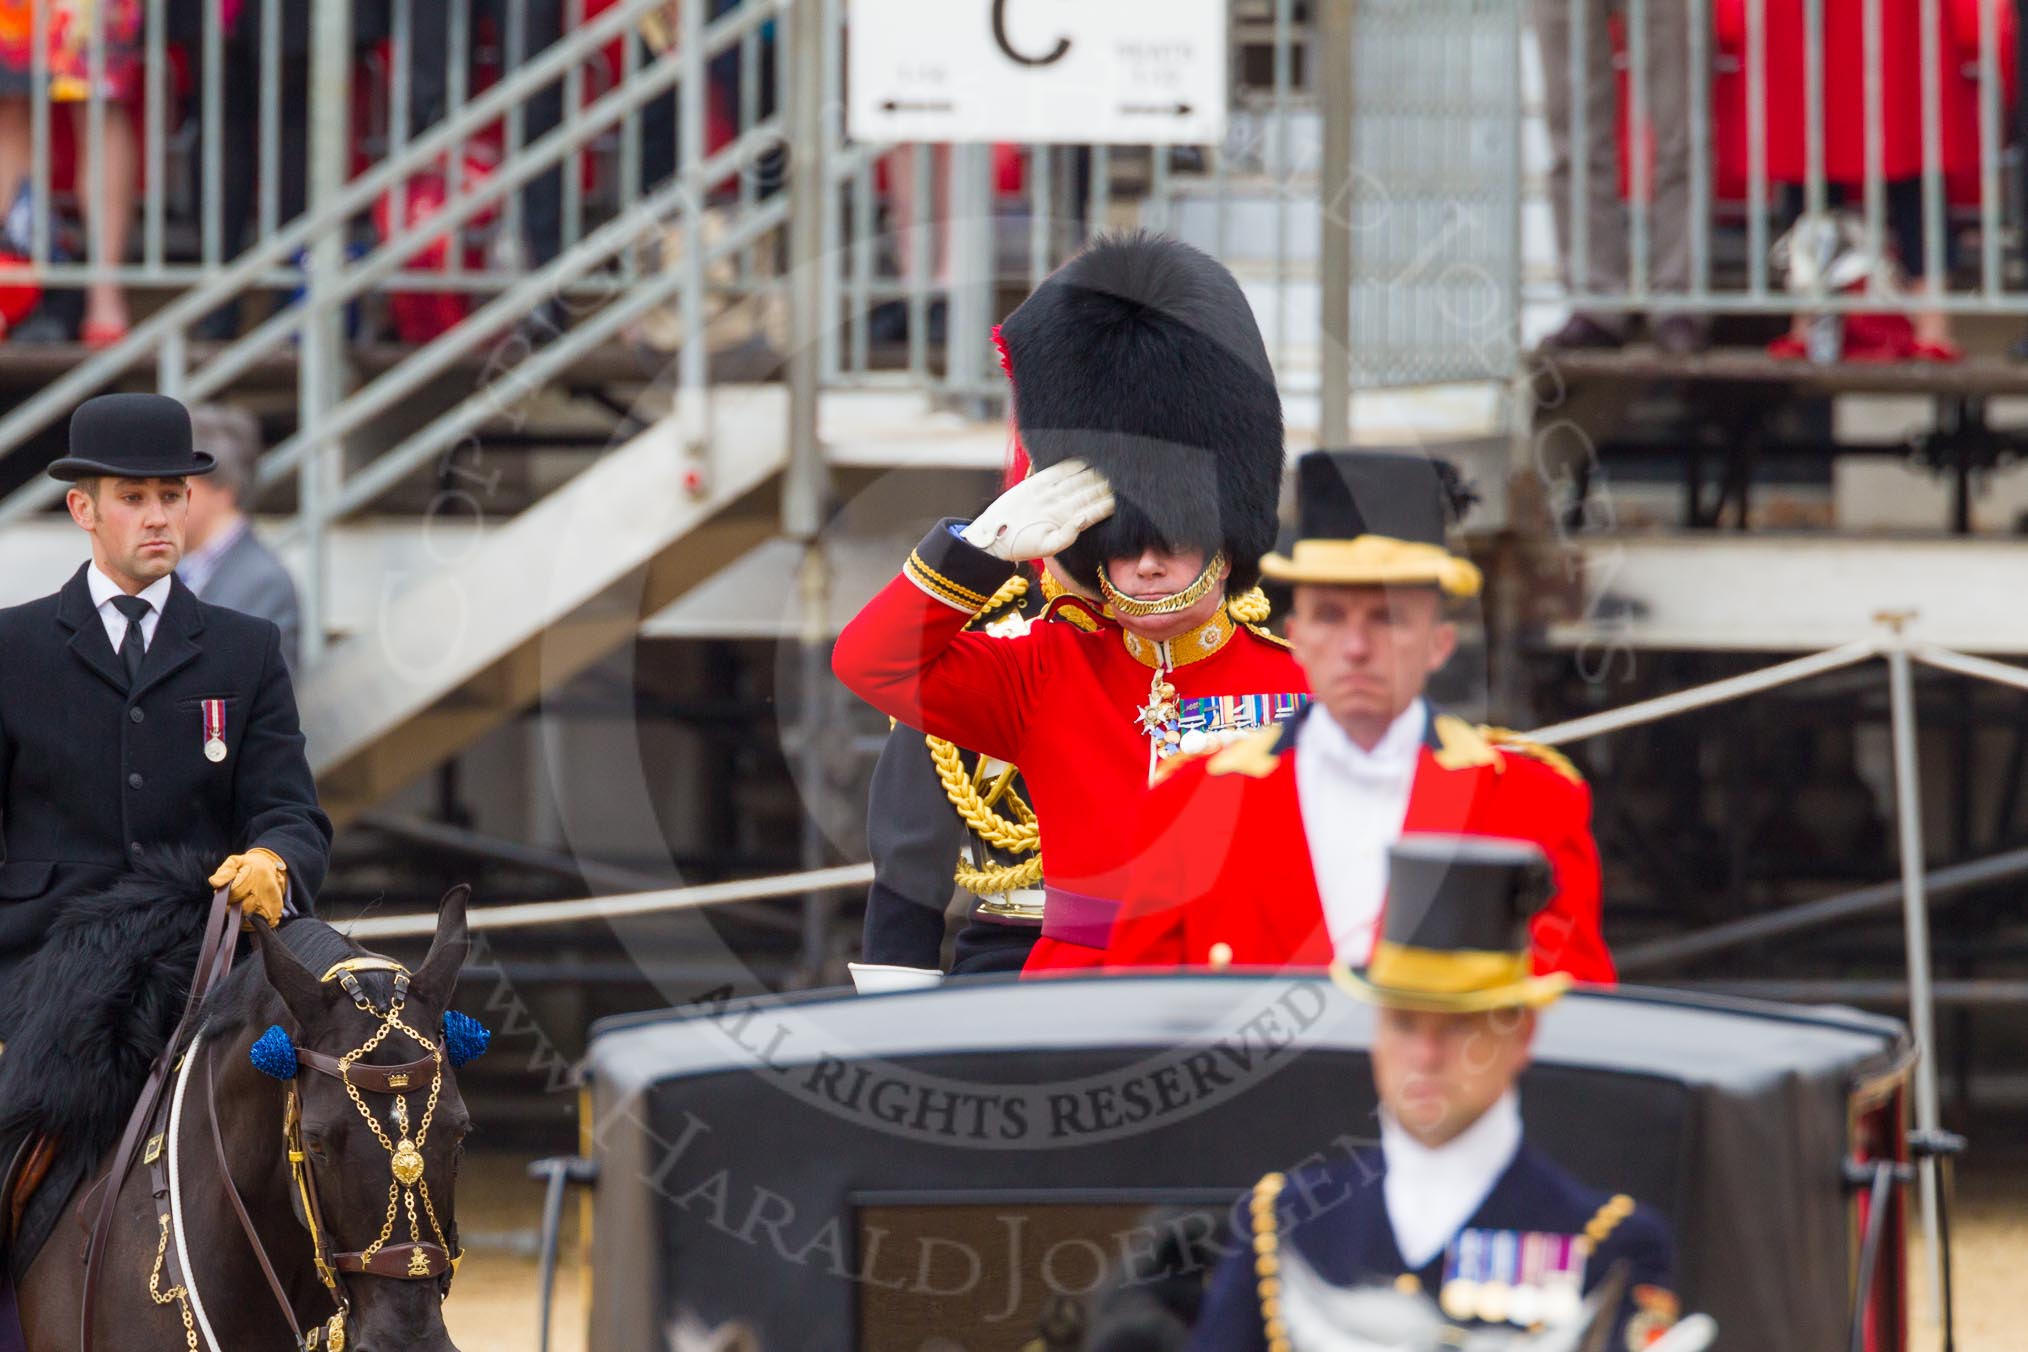 The Colonel's Review 2016.
Horse Guards Parade, Westminster,
London,

United Kingdom,
on 04 June 2016 at 10:59, image #169